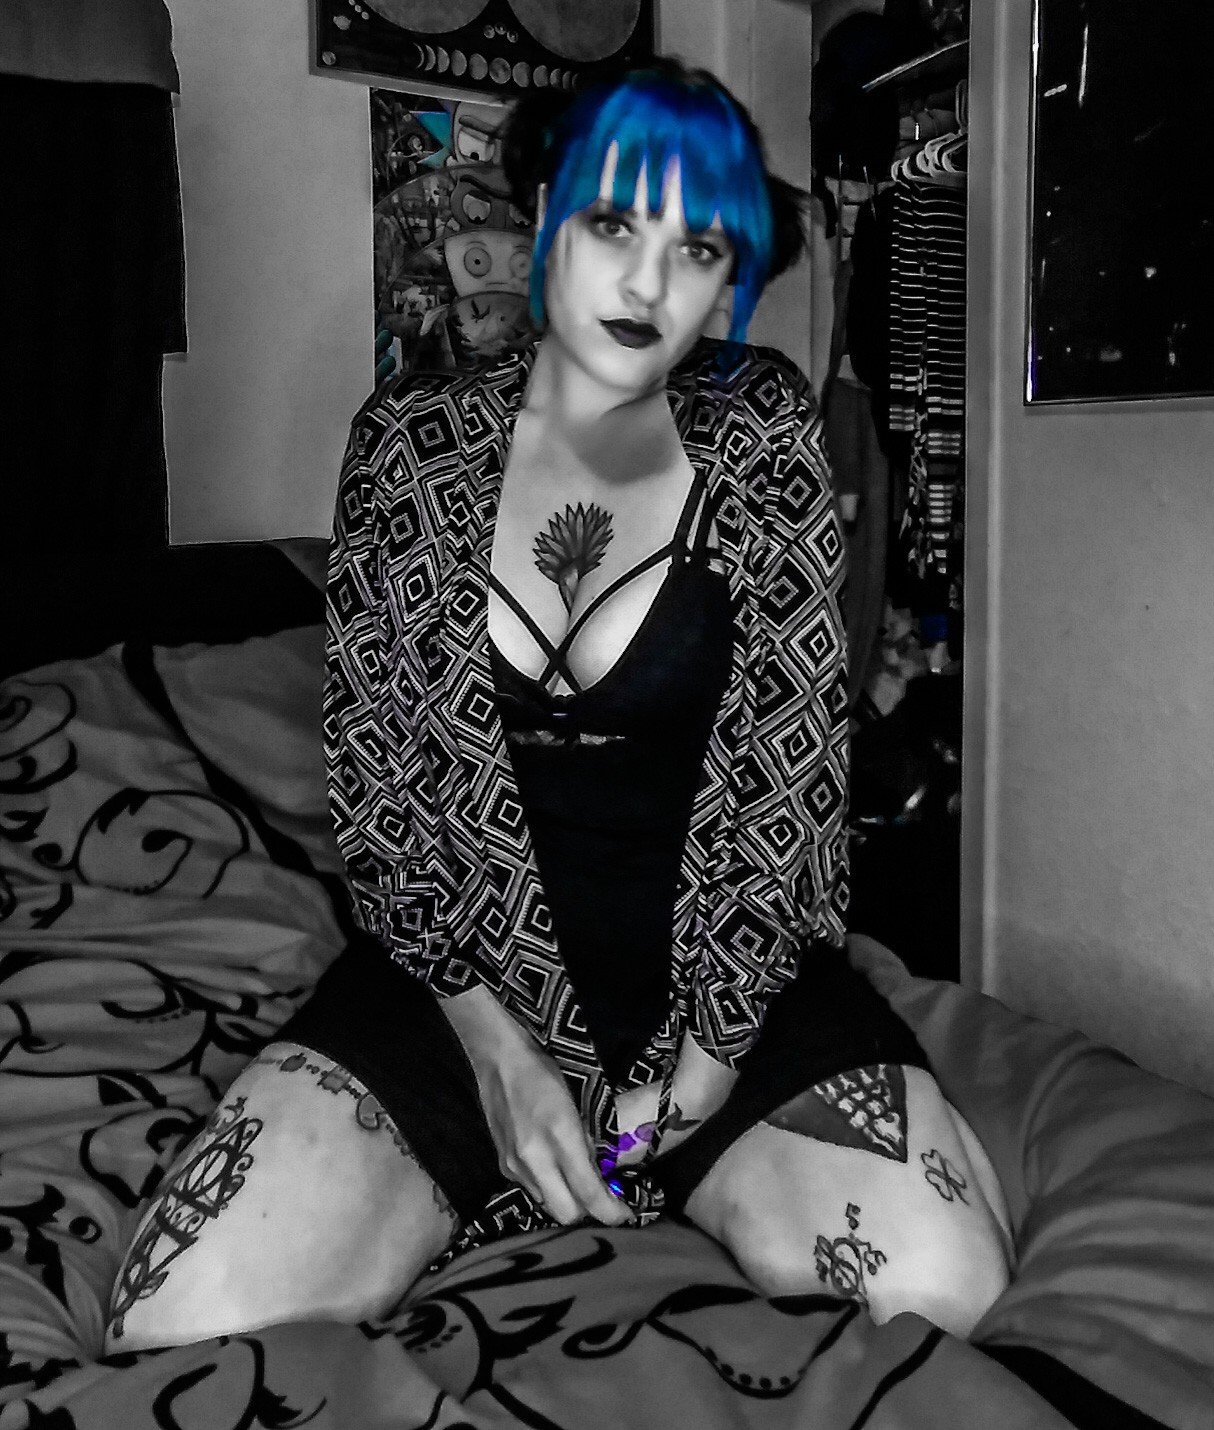 Photo by villainous vixen with the username @villainousvixen, who is a star user,  August 7, 2020 at 7:20 PM. The post is about the topic MILF and the text says 'Hey ya hungry heathens!-- Did you know you can subscribe to my onlyfans? Wanna make sure you don't miss out on any upcoming content?? 

CUM grab 6 months for less that $30! 

DO IT! now. 

I'm waiting.

https://onlyfans.com/villainousvixen'